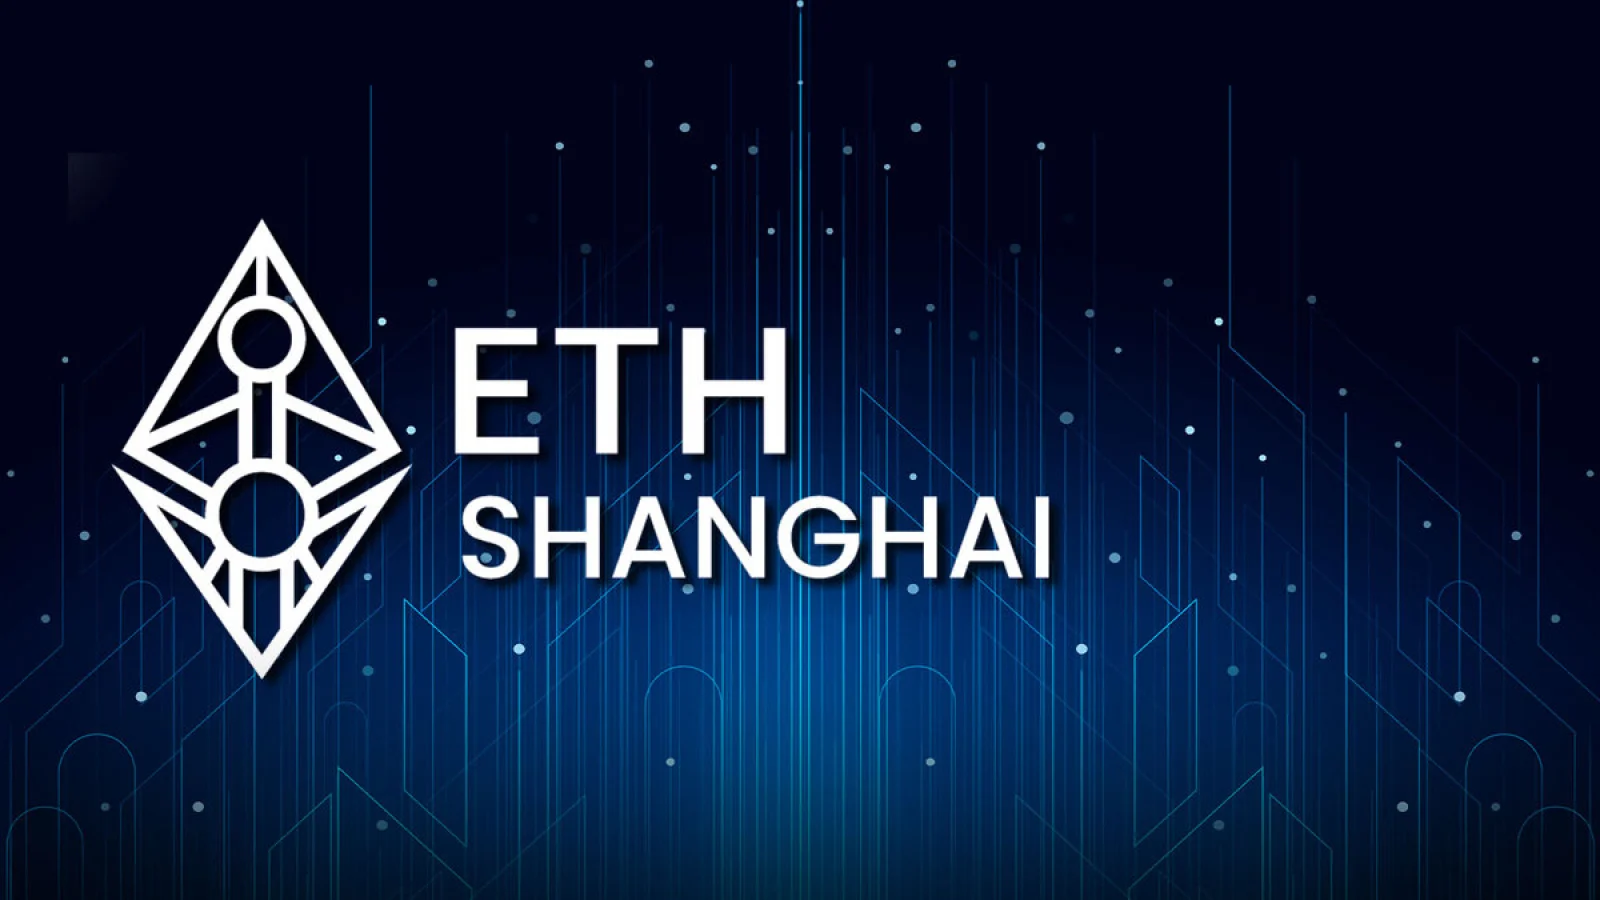 The Shanghai Hard fork is Coming: What to Expect? 2